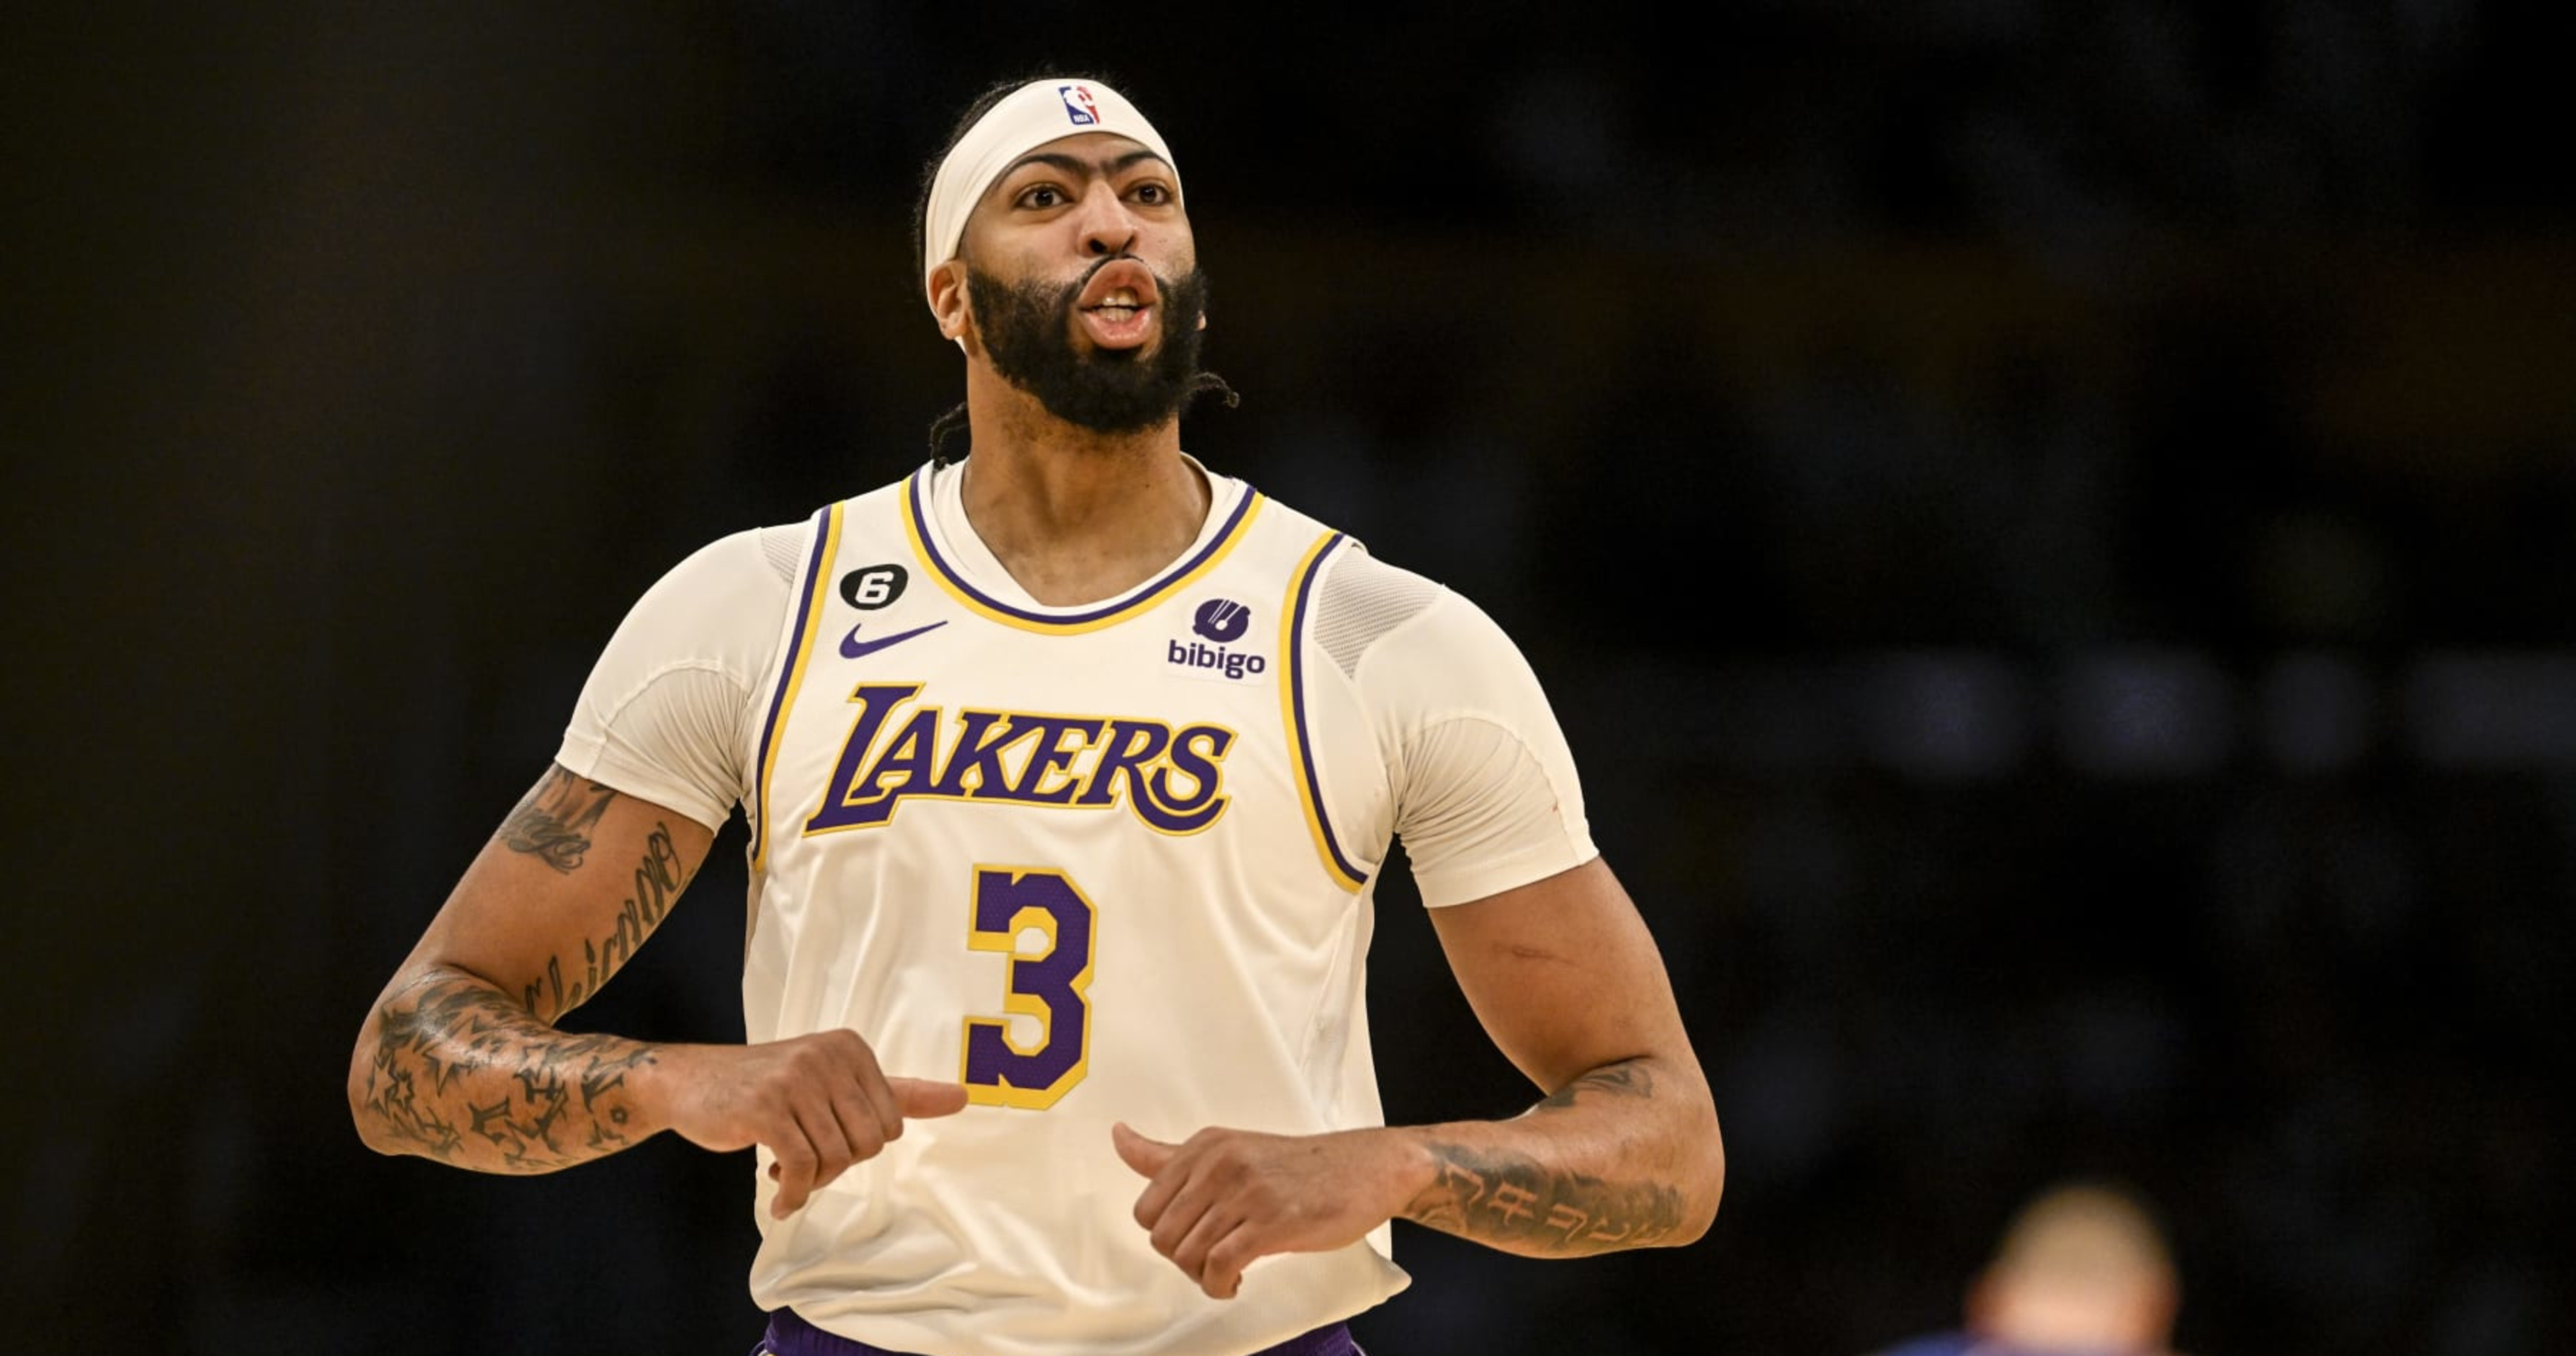 Report: Anthony Davis expected to sign extension before Lakers